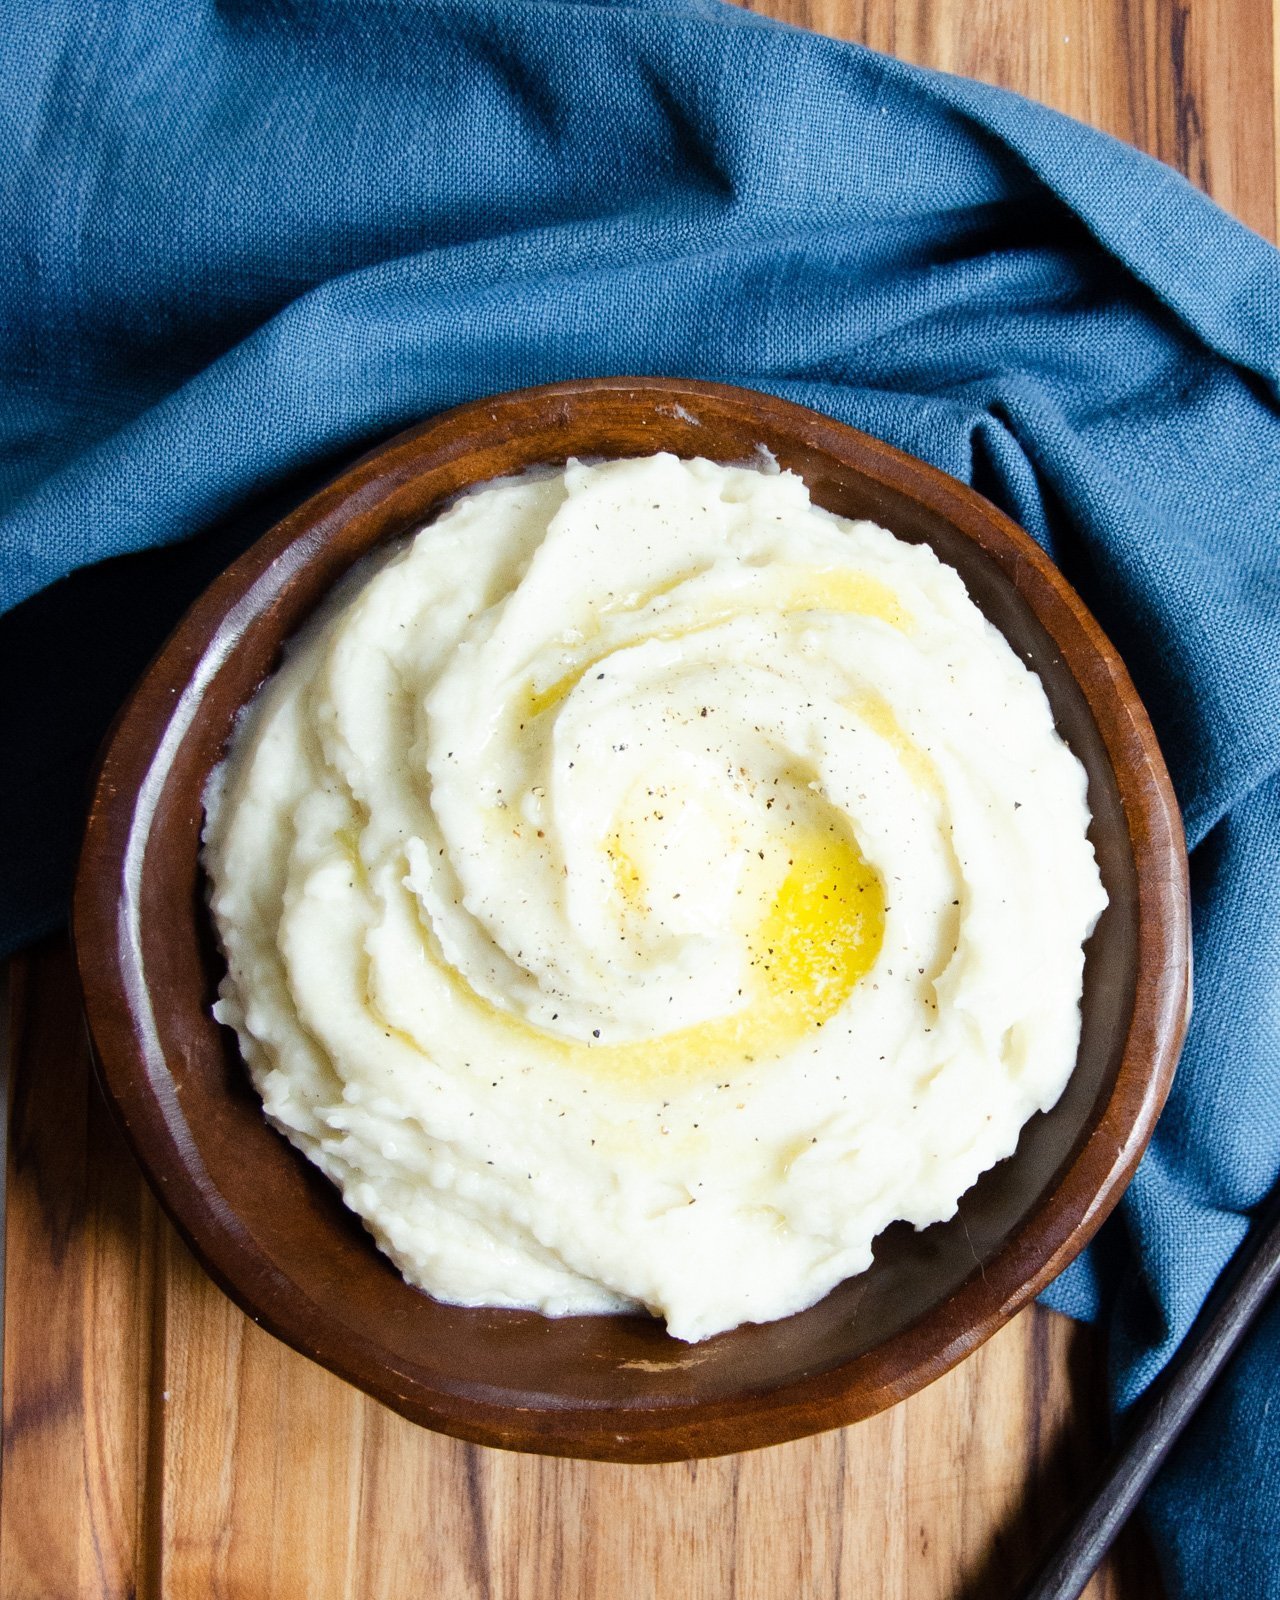 OXO - What's your trick for making fluffy mashed potatoes? We use